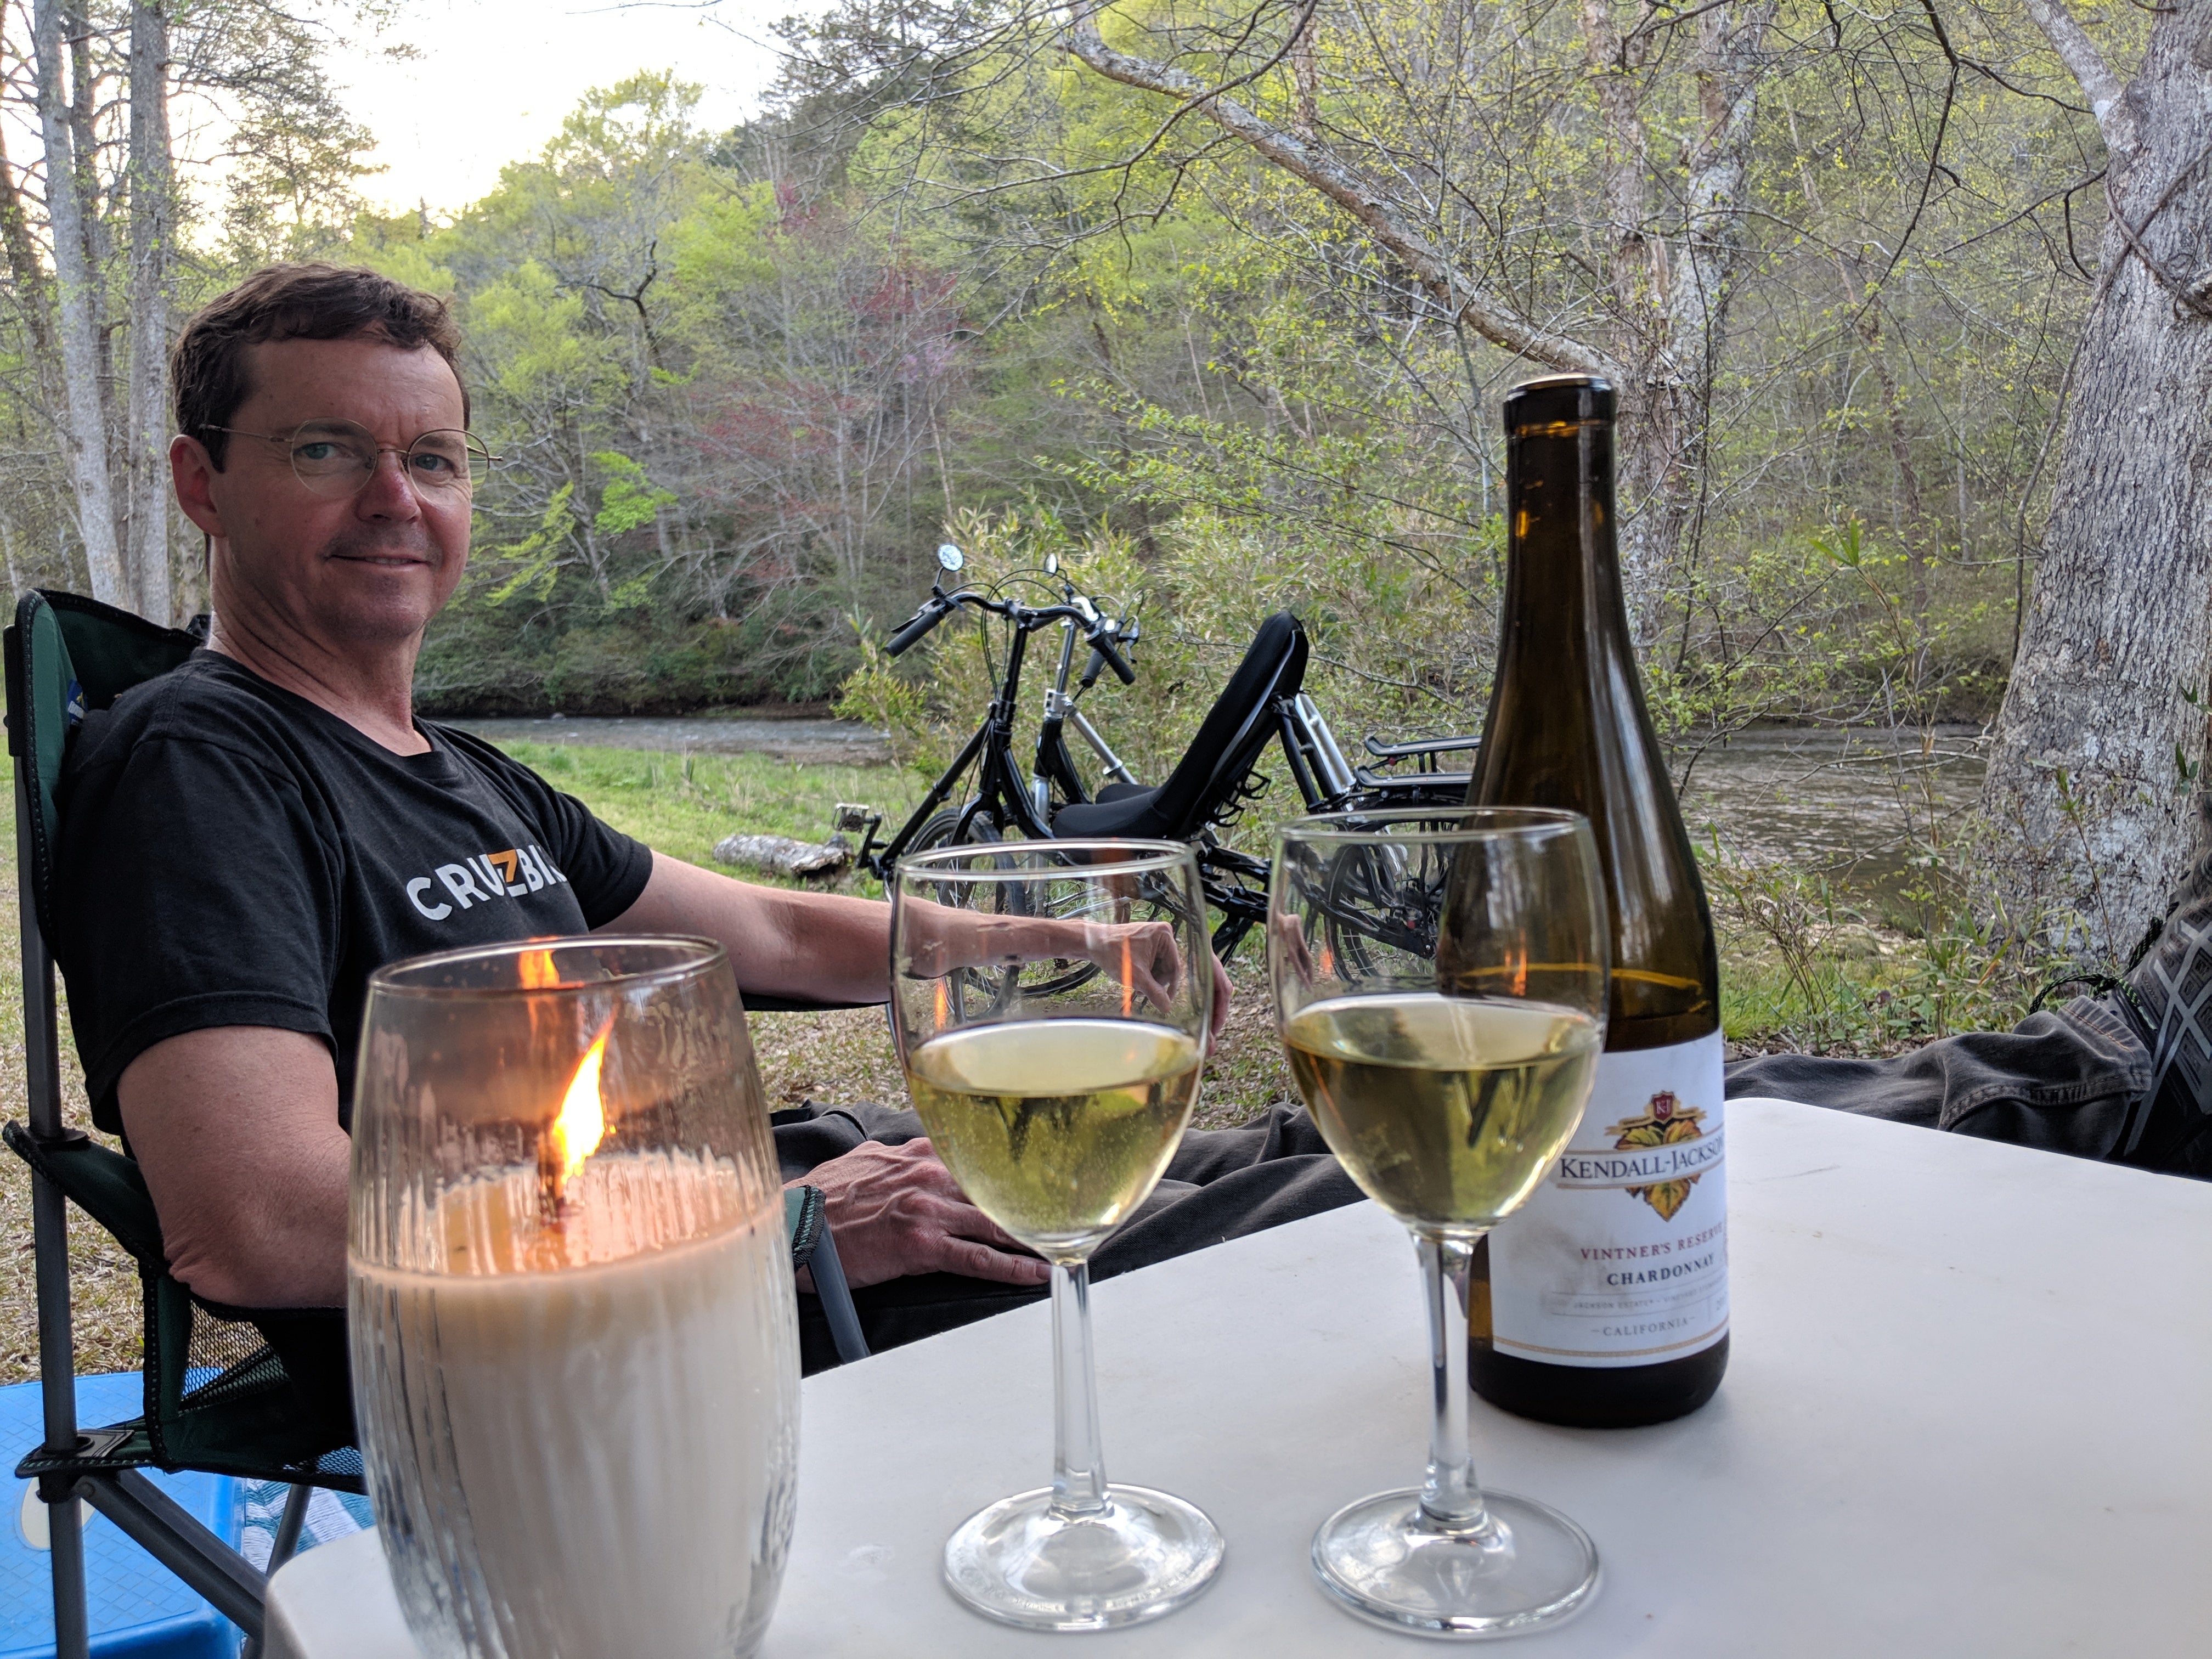 Cycling vacation recumbent bicycle tour Chief Ladiga Trail Campground